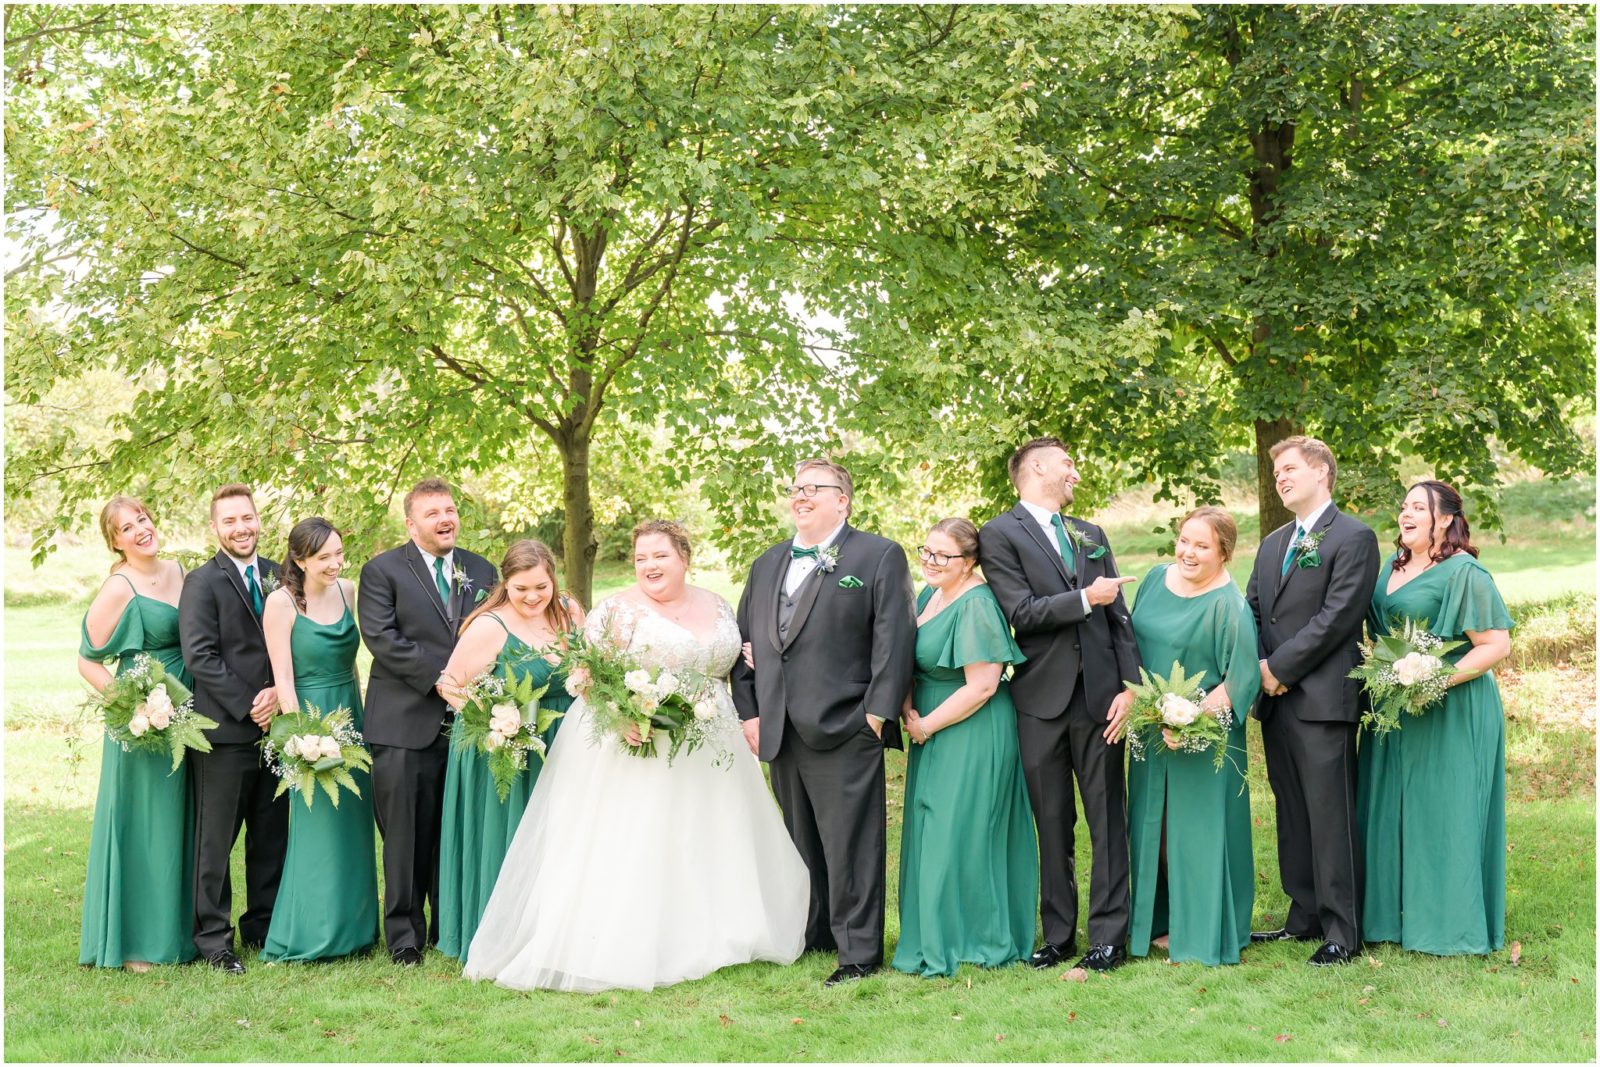 Bridal party laughing together Balmoral House wedding